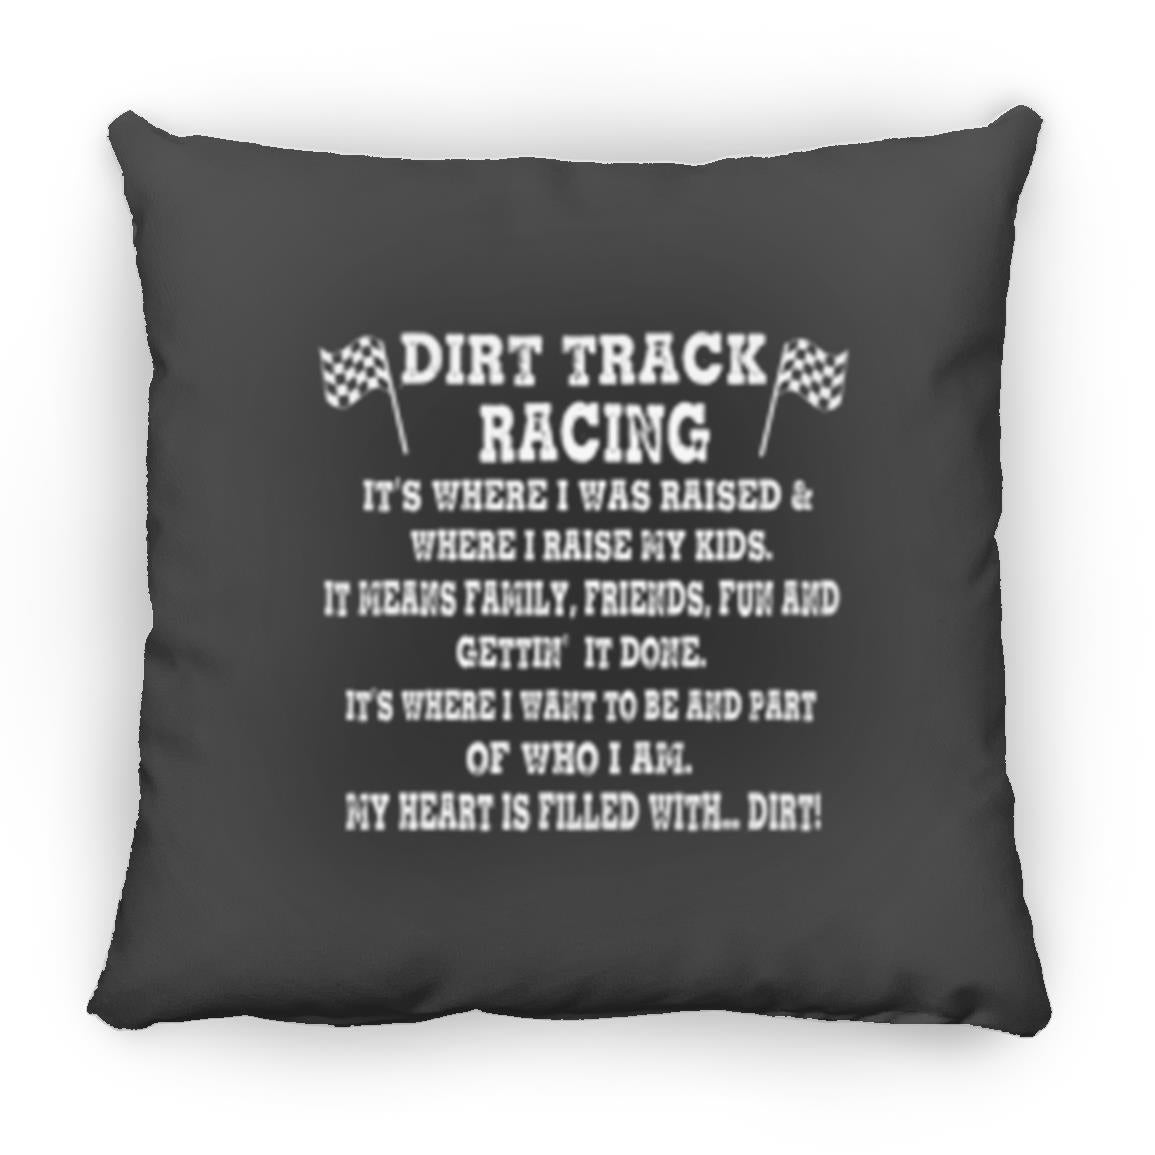 Dirt Track Racing It's Where I Was Raised Medium Square Pillow